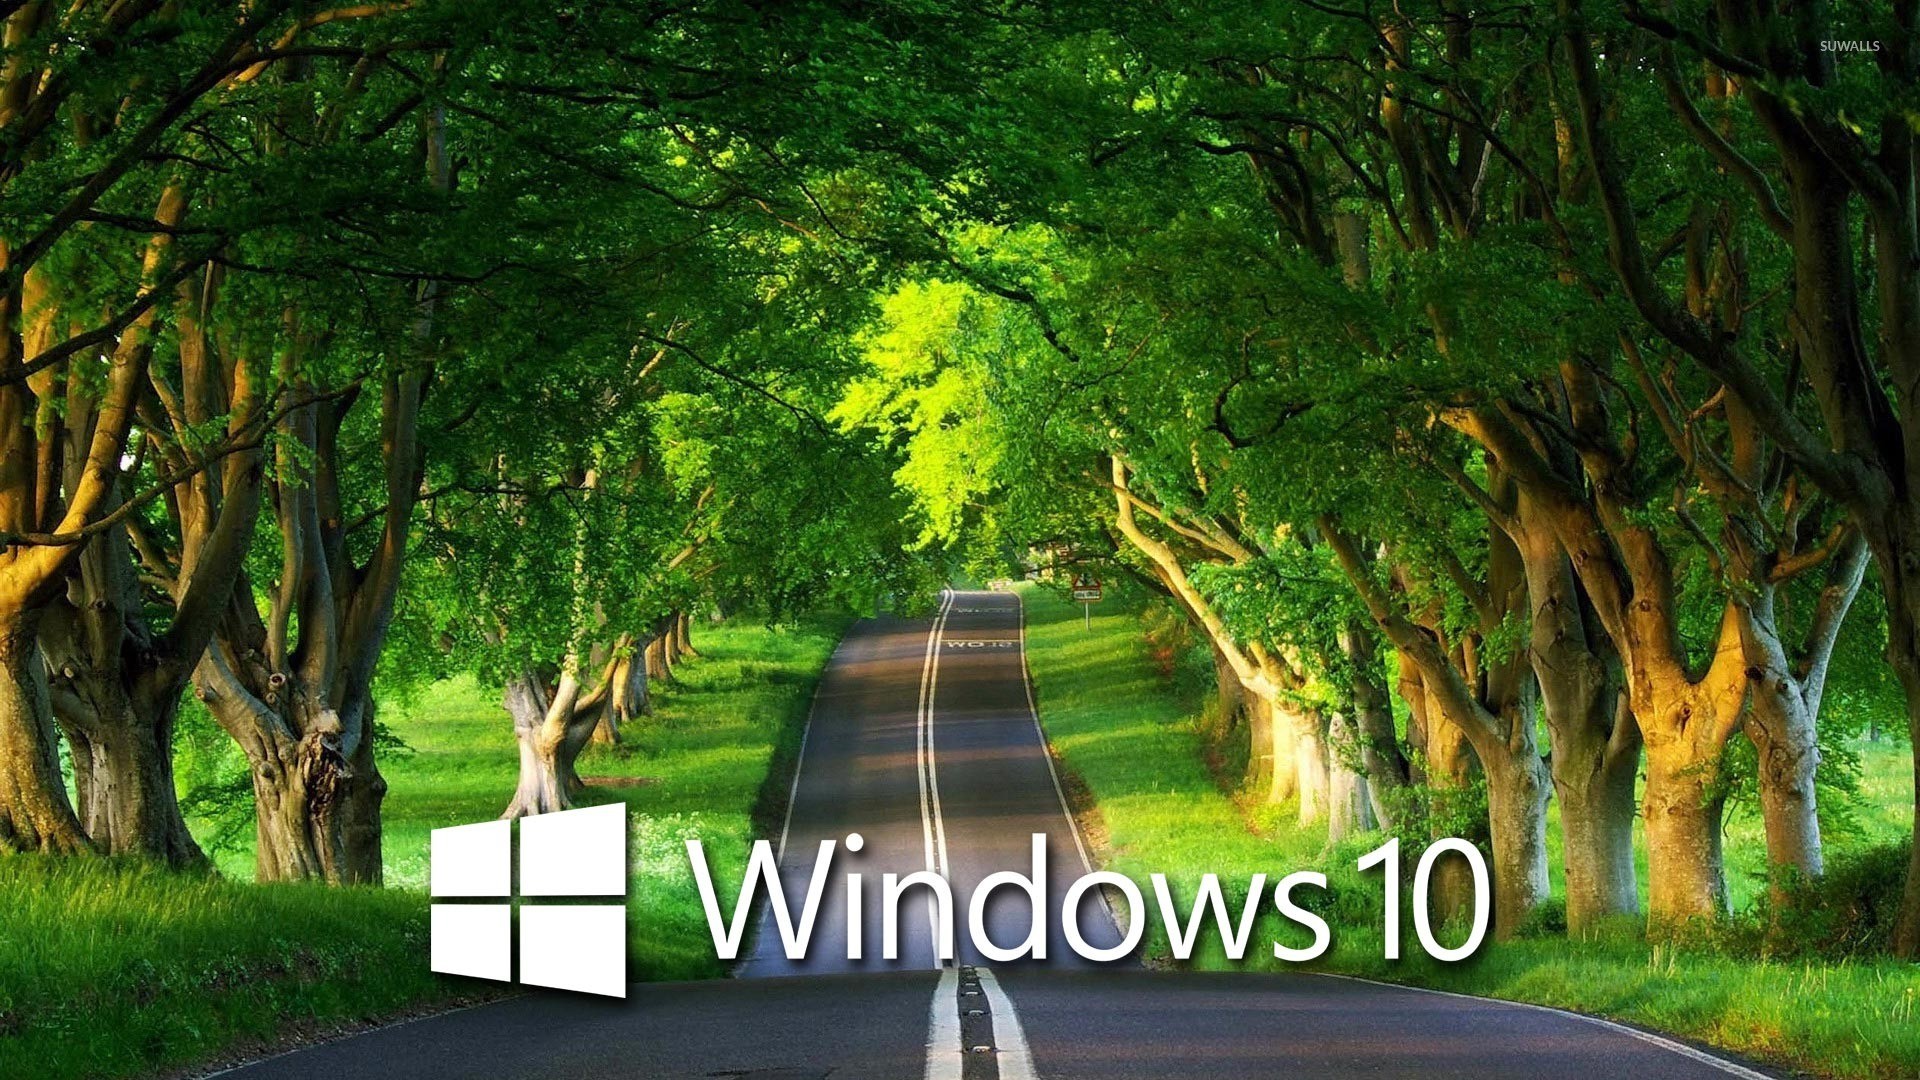 1920x1080 Windows 10 over the country road [4] wallpaper  jpg